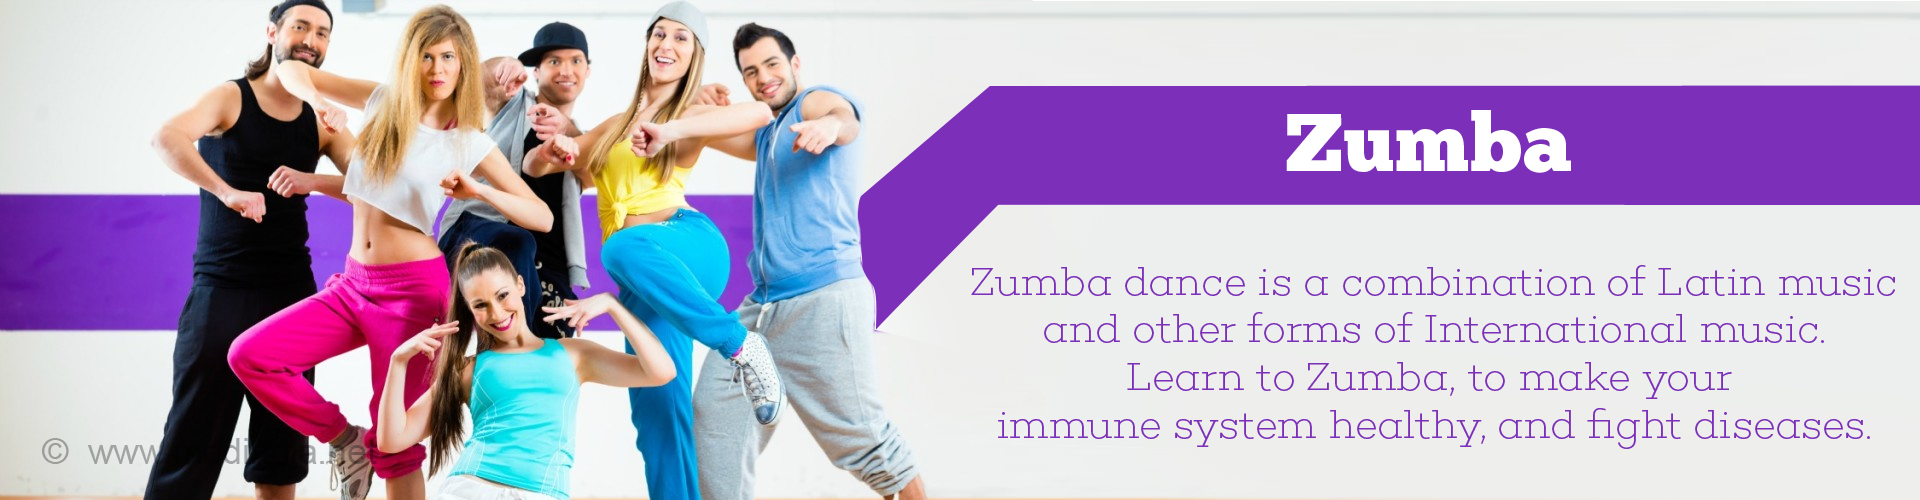 Zumba: Zumba dance is a combination of Latin music and other forms of International music. Learn to Zumba, to make your immune system healthy, and fight diseases.